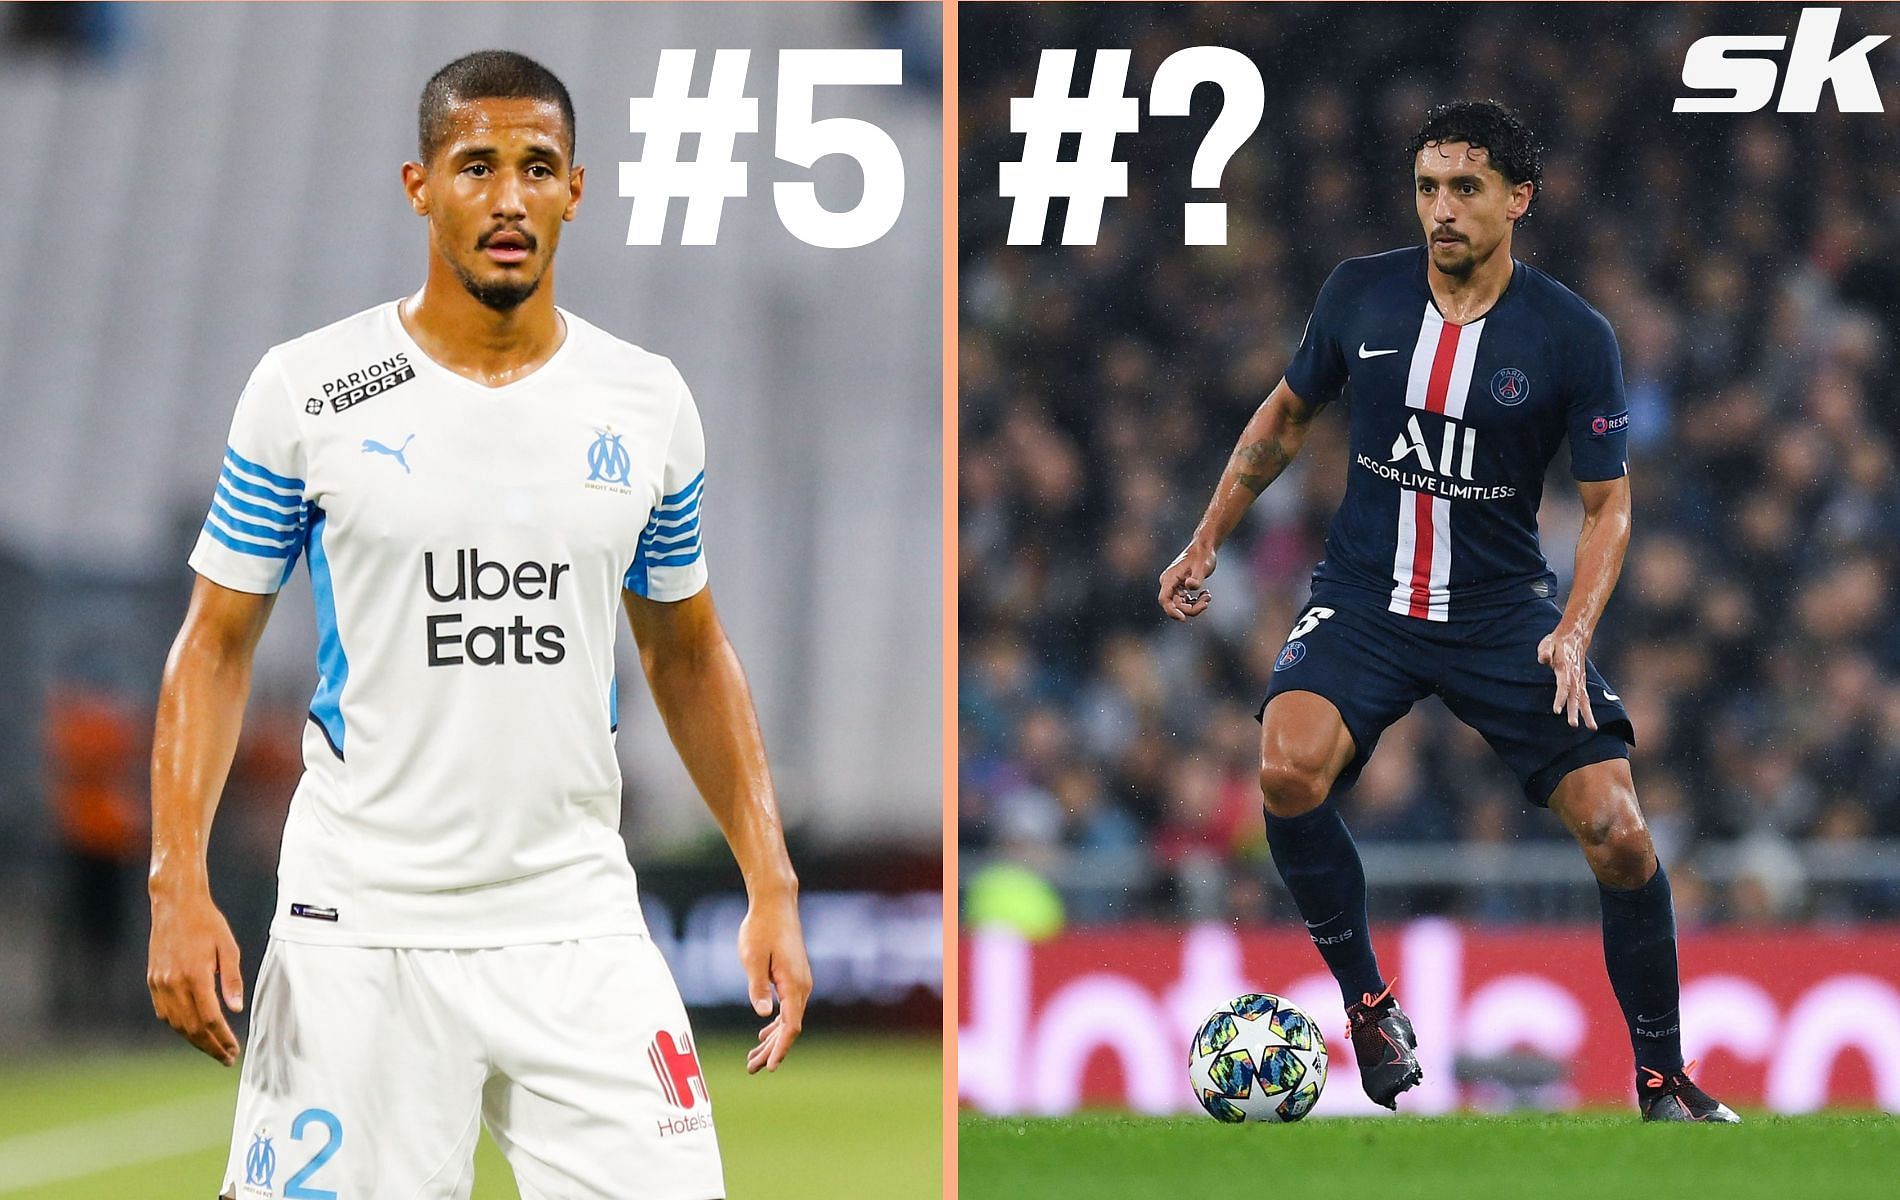 Saliba and Marquiinhos were fabulous in Ligue 1 this year.